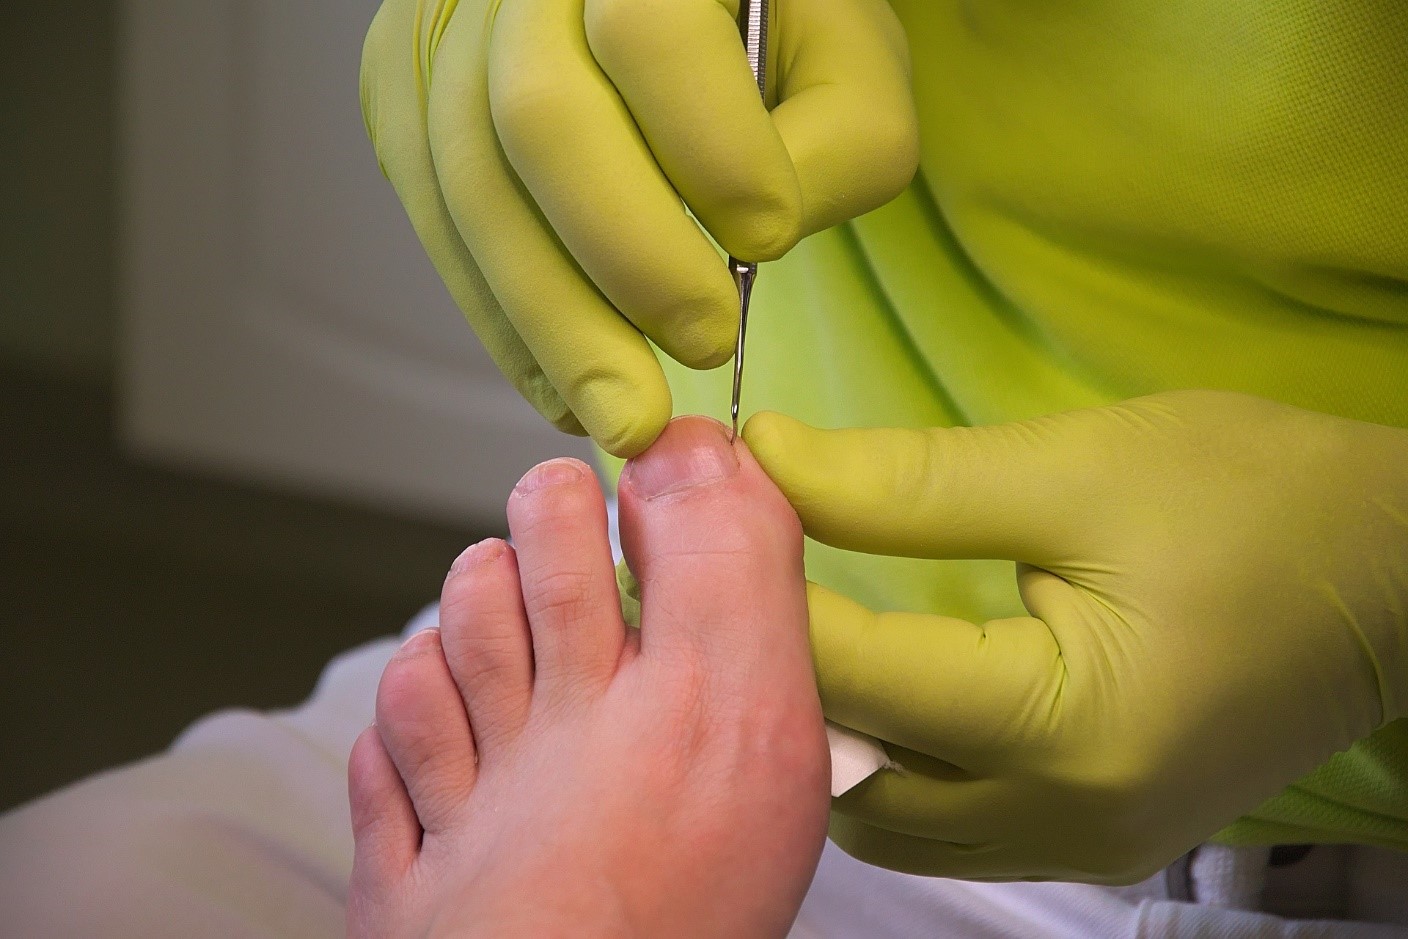 How to Prevent Diabetic Foot Ulcers